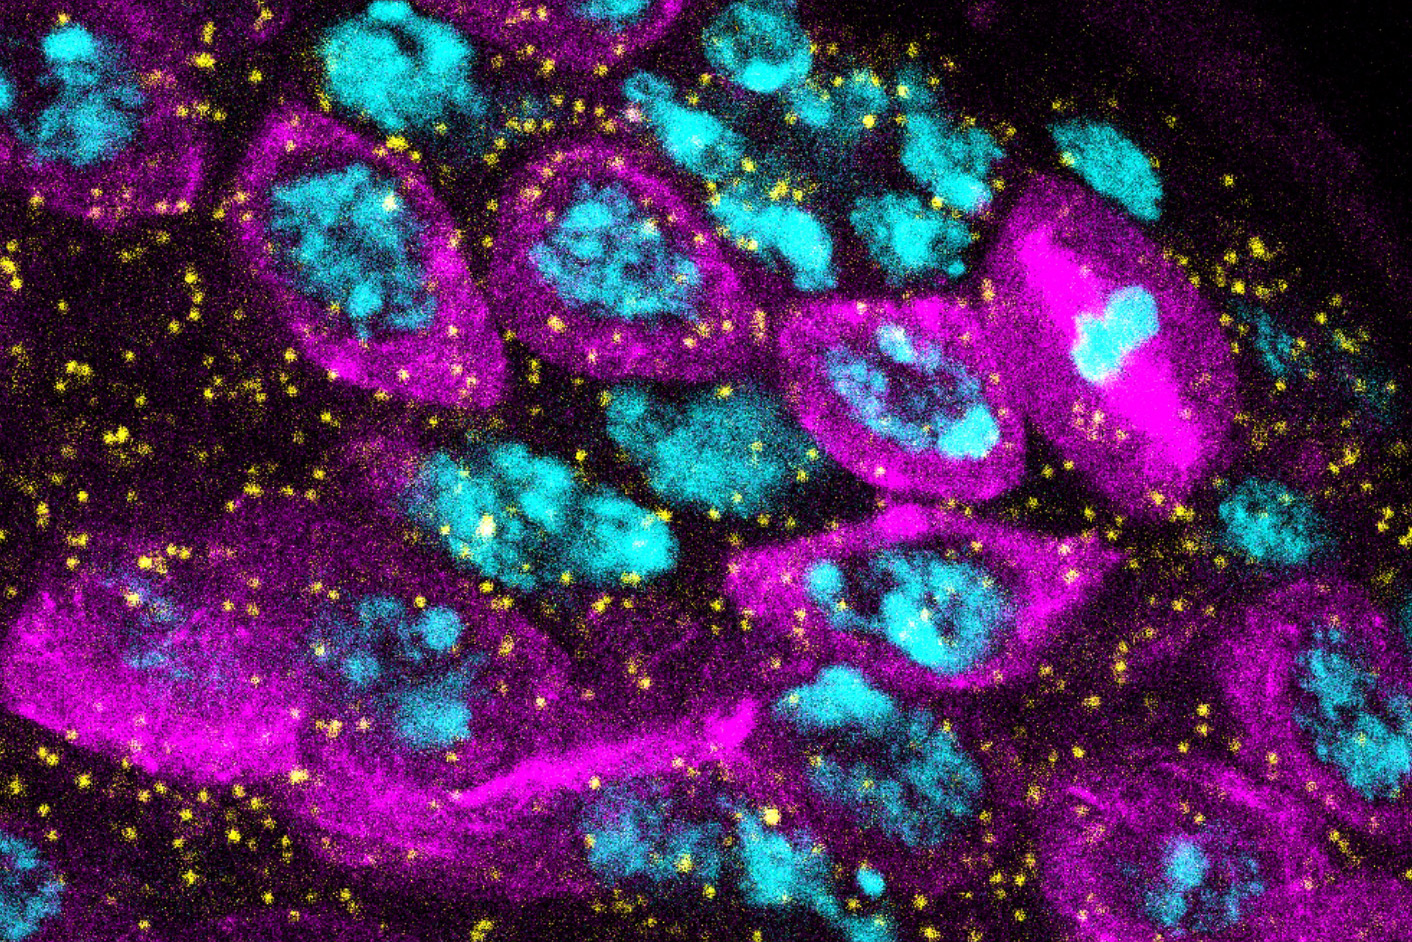 Fruit fly germ cells are visualized by germline-specific expression of Tubulin-GFP (magenta), and DNA is marked by counterstaining with DAPI (cyan). The yellow dots show expression of Stat92E, which gradually declines as the stem cells transform into sperm (Contributed image).